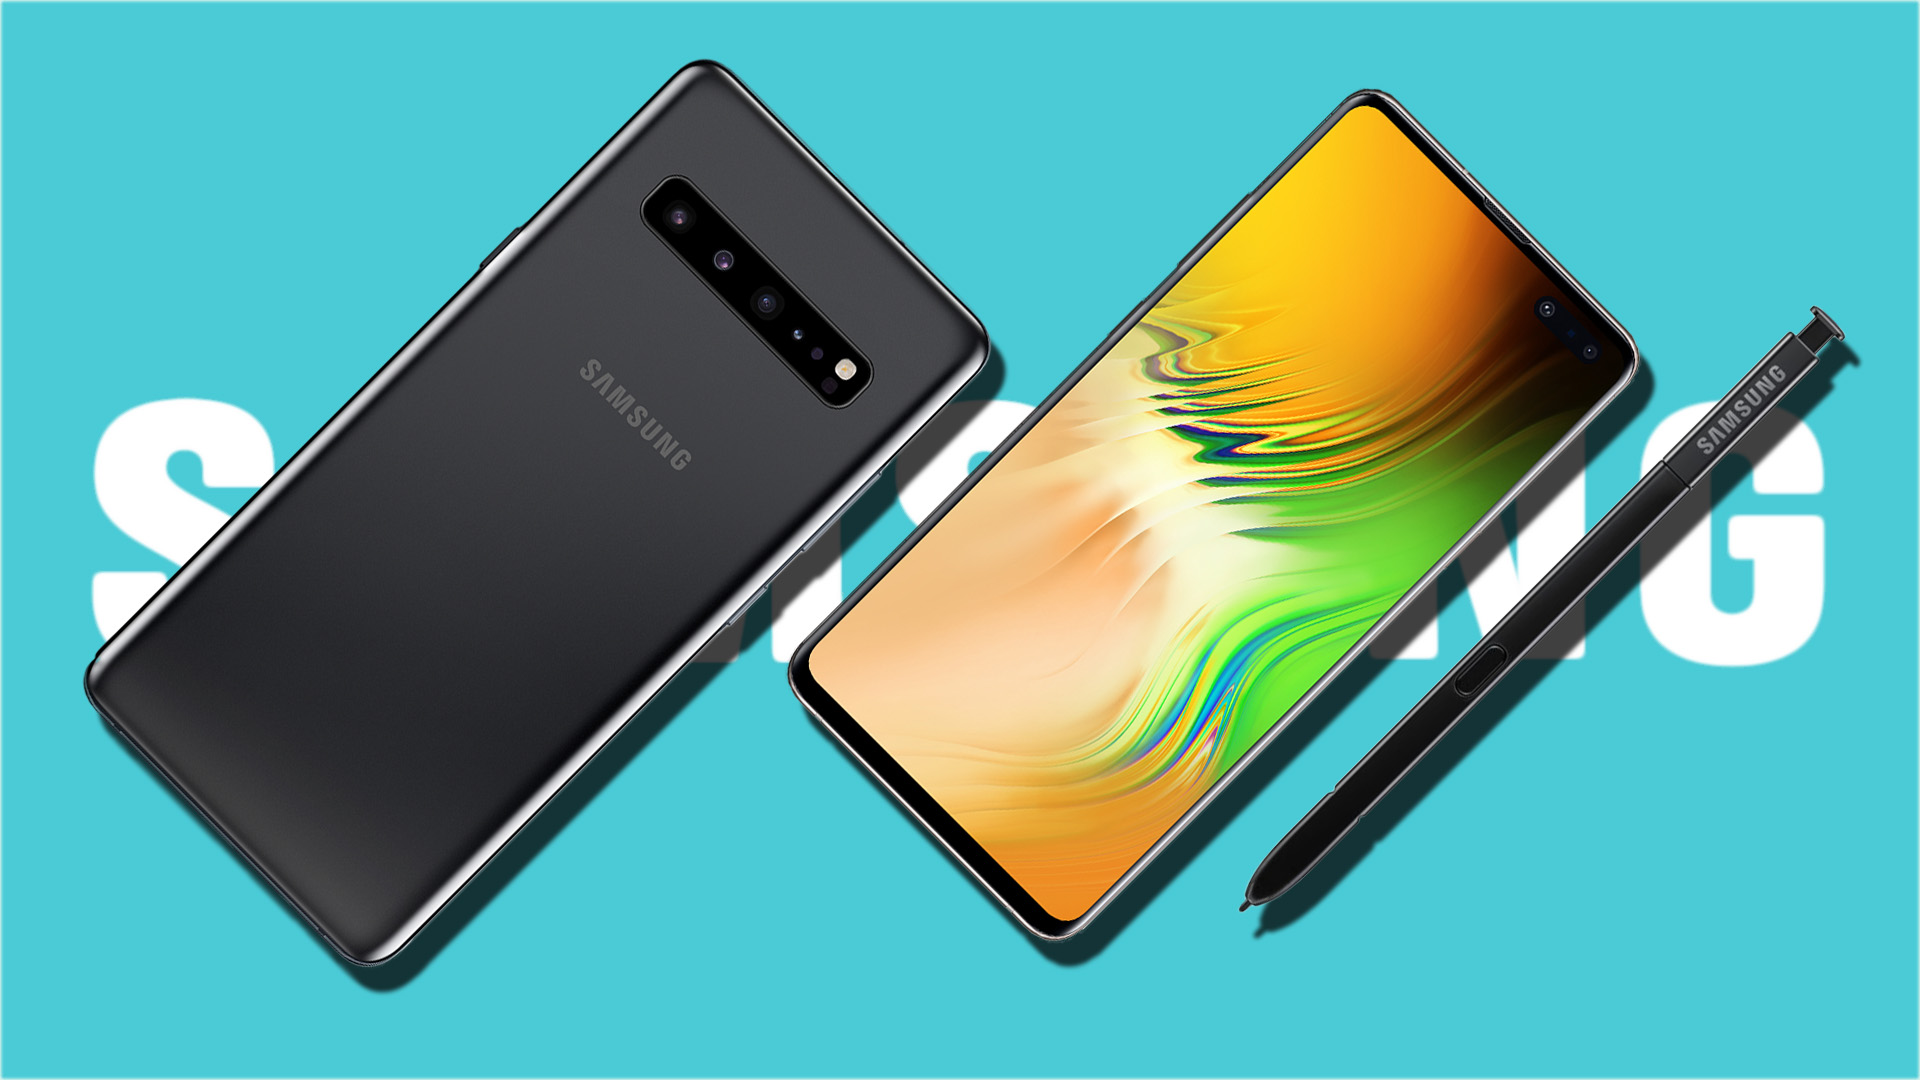 https://www.gsmarena.com/samsung_galaxy_note10_5g_appears_in_final_render_with_august_23_release_date-news-38444.php